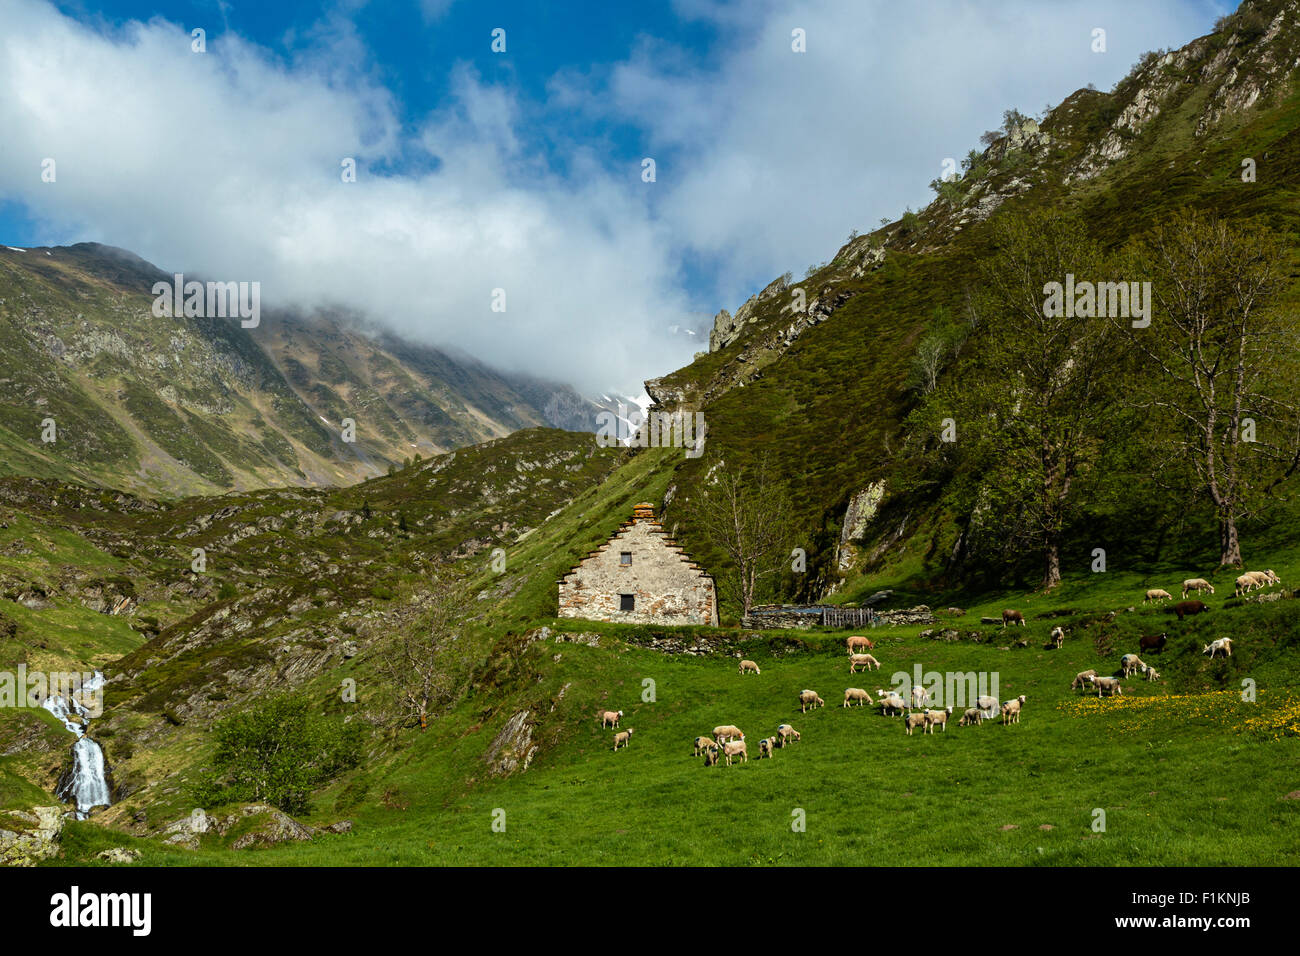 Valley of Lyse,national park of Pyrenees, Hautes Pyrenees, France Stock Photo